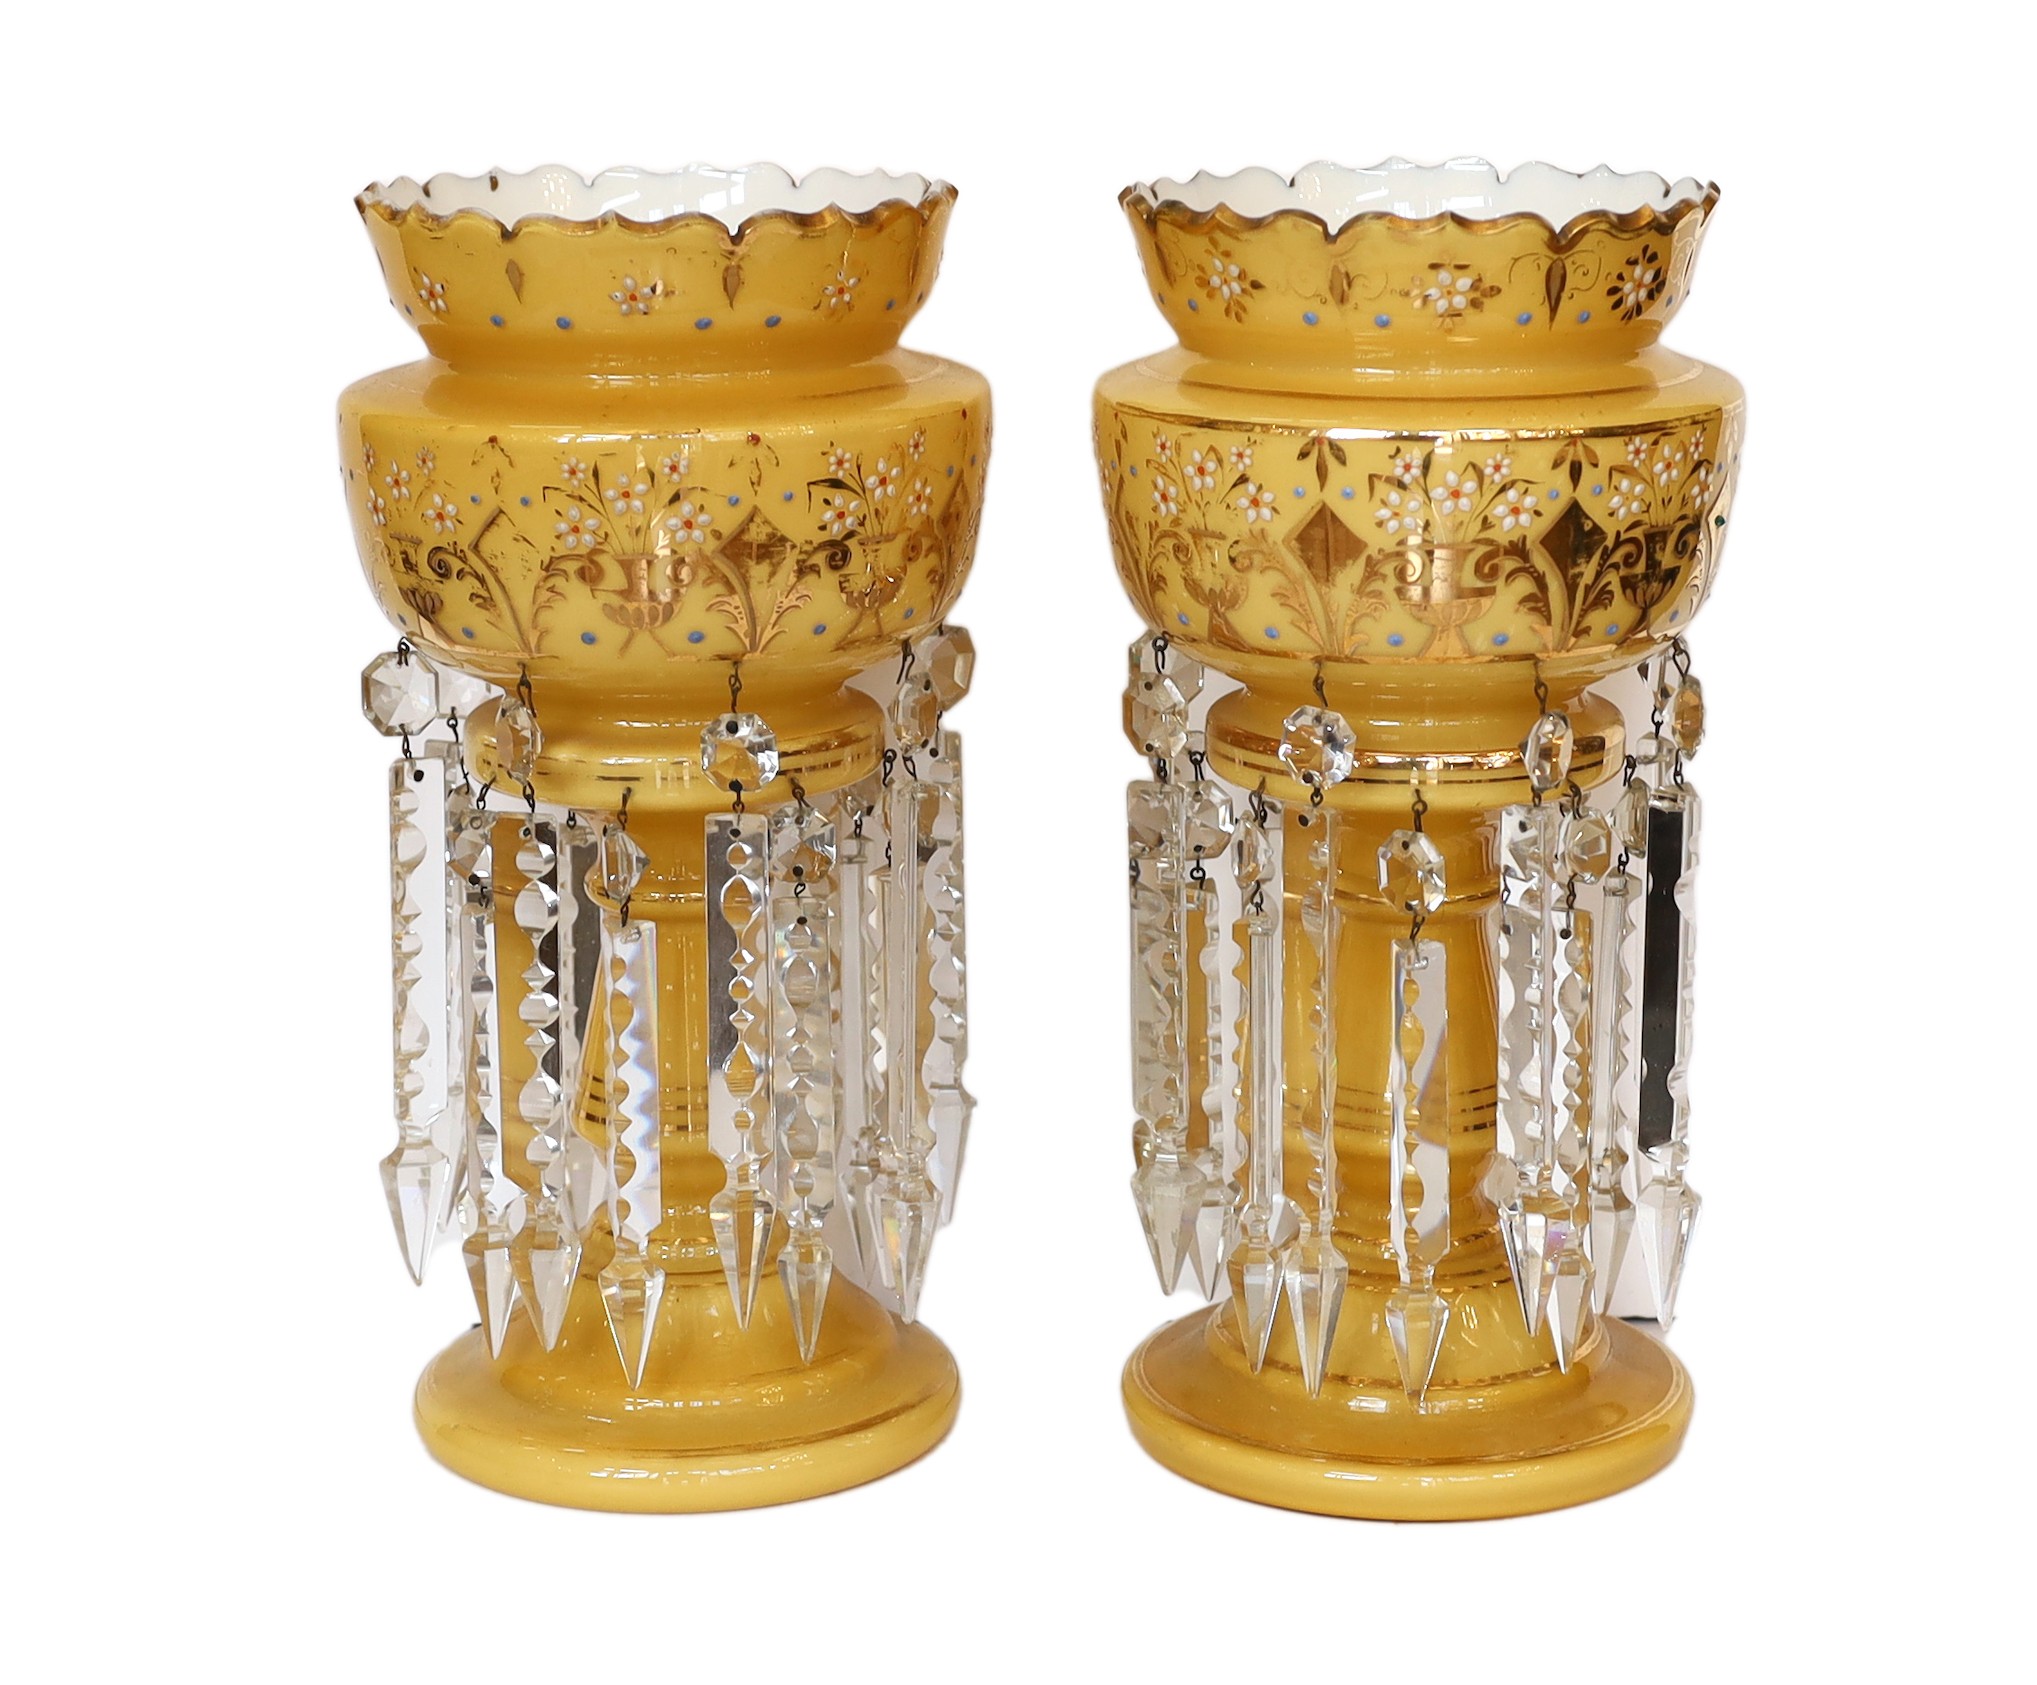 A pair of late 19th century Bohemian opaque glass lustres with enamelled and gilt floral decoration,